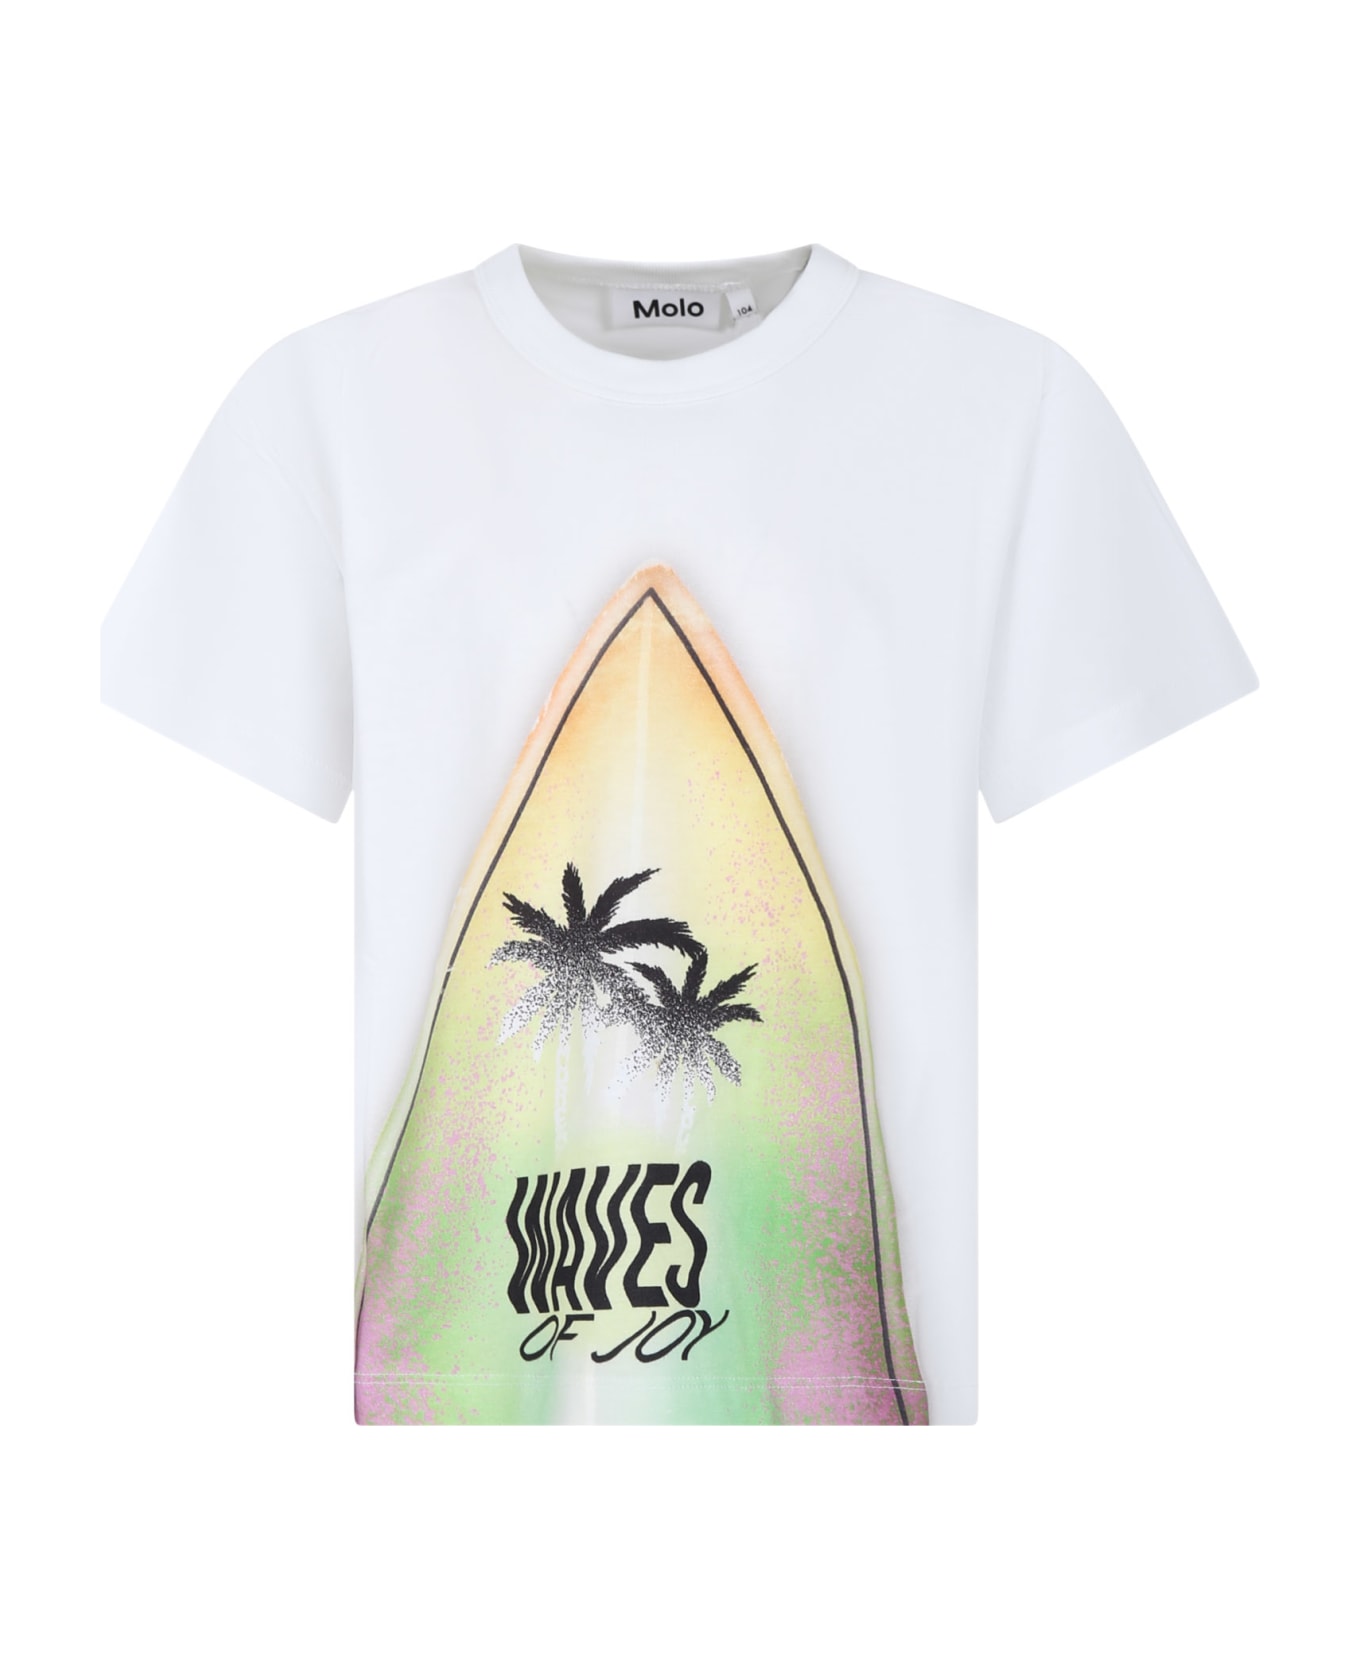 Molo White T-shirt For Boy With Surfboard Print - White